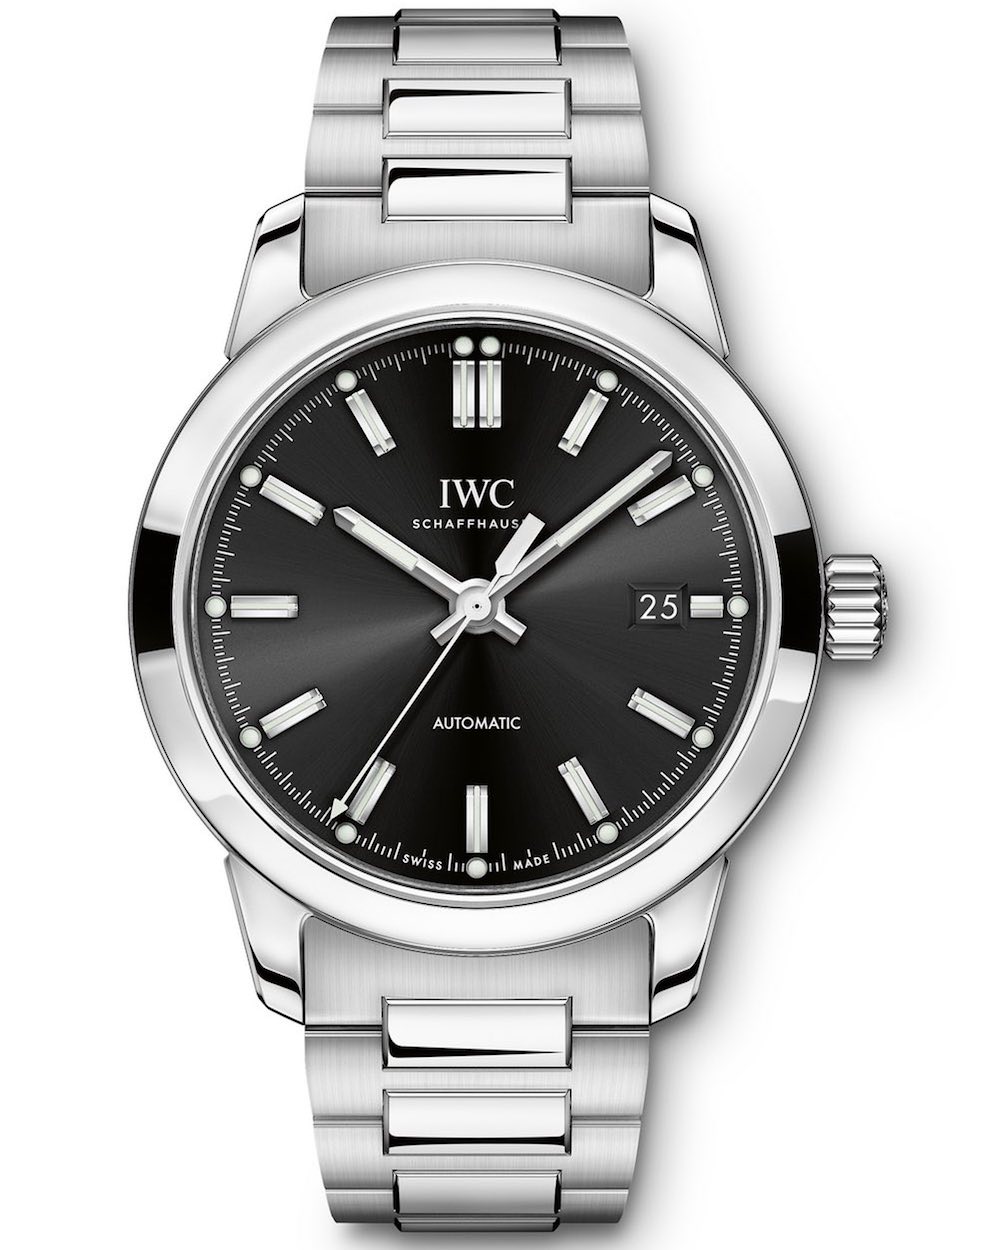 IWC Ingenieur Collection Expanded By Four New Models Watch Releases 